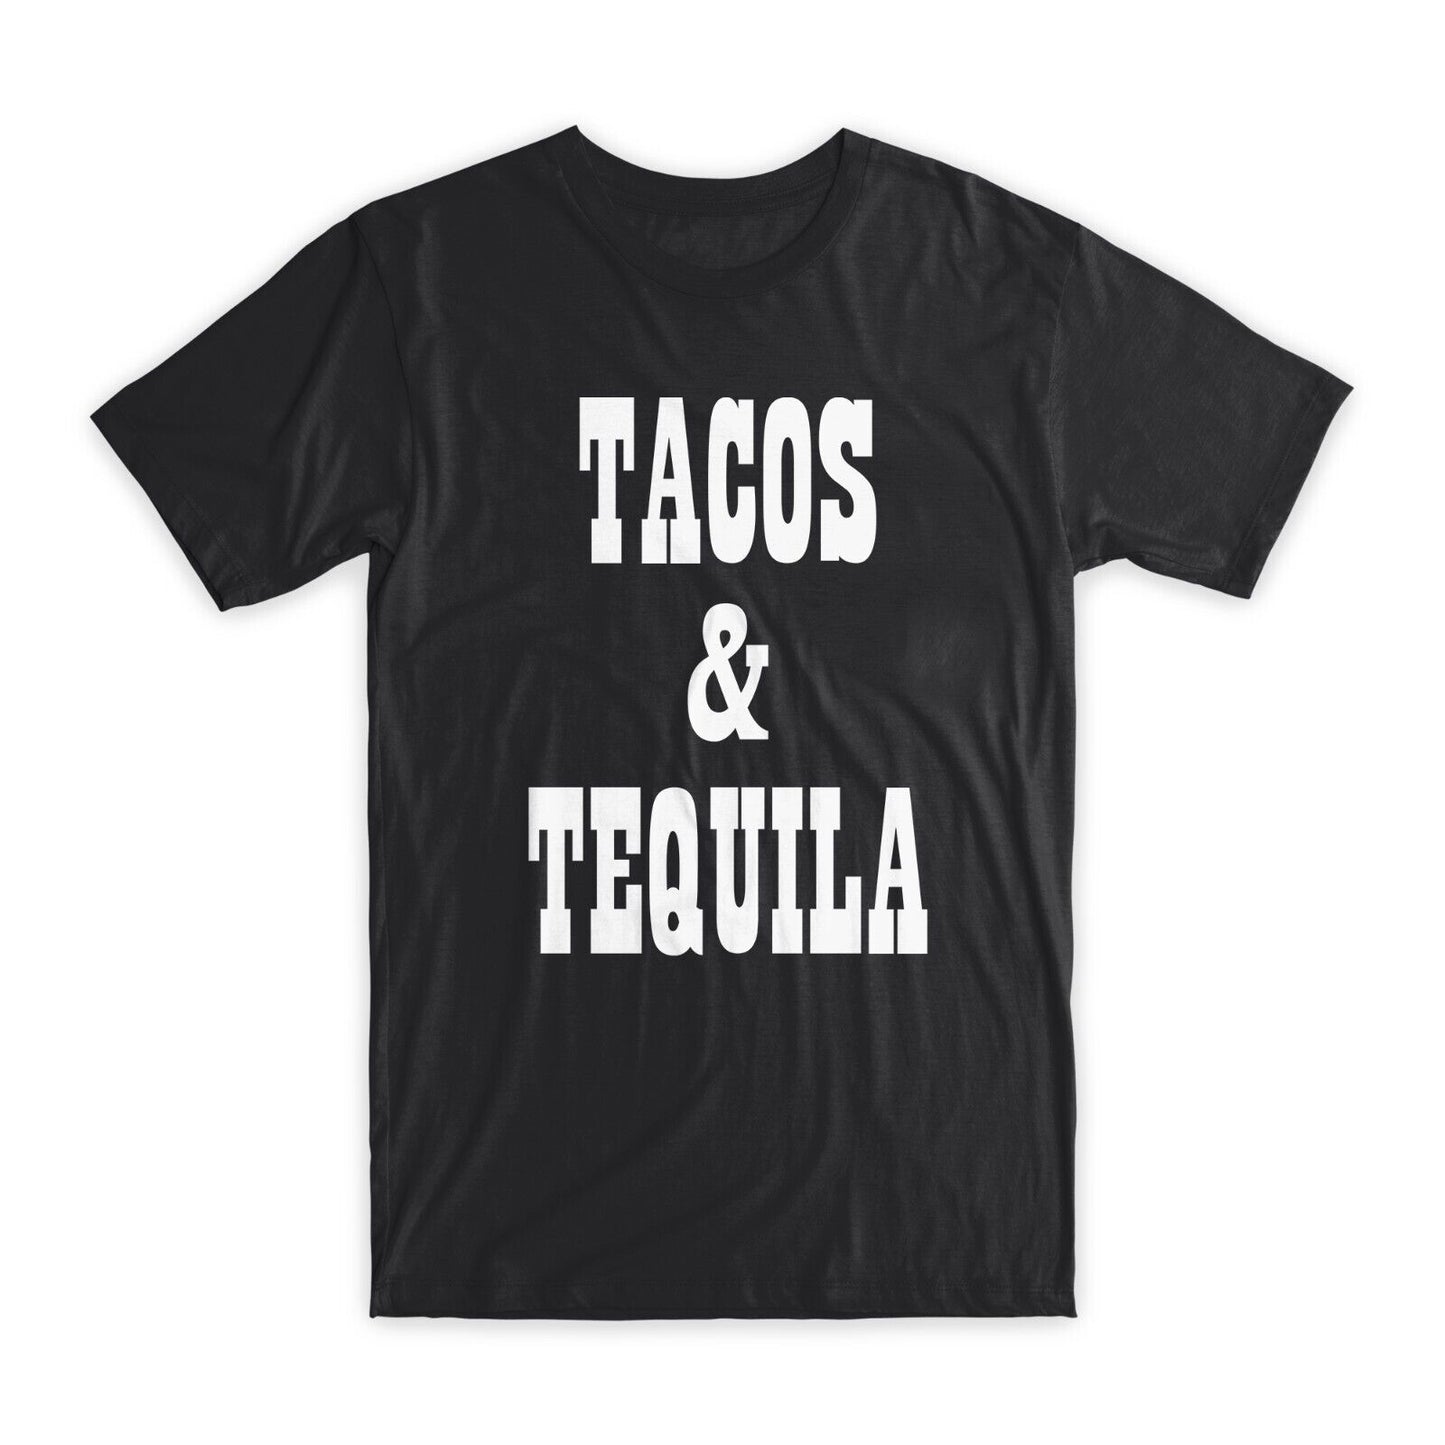 Tacos & Tequila T-Shirt Premium Soft Cotton Crew Neck Funny Tee Novelty Gift NEW